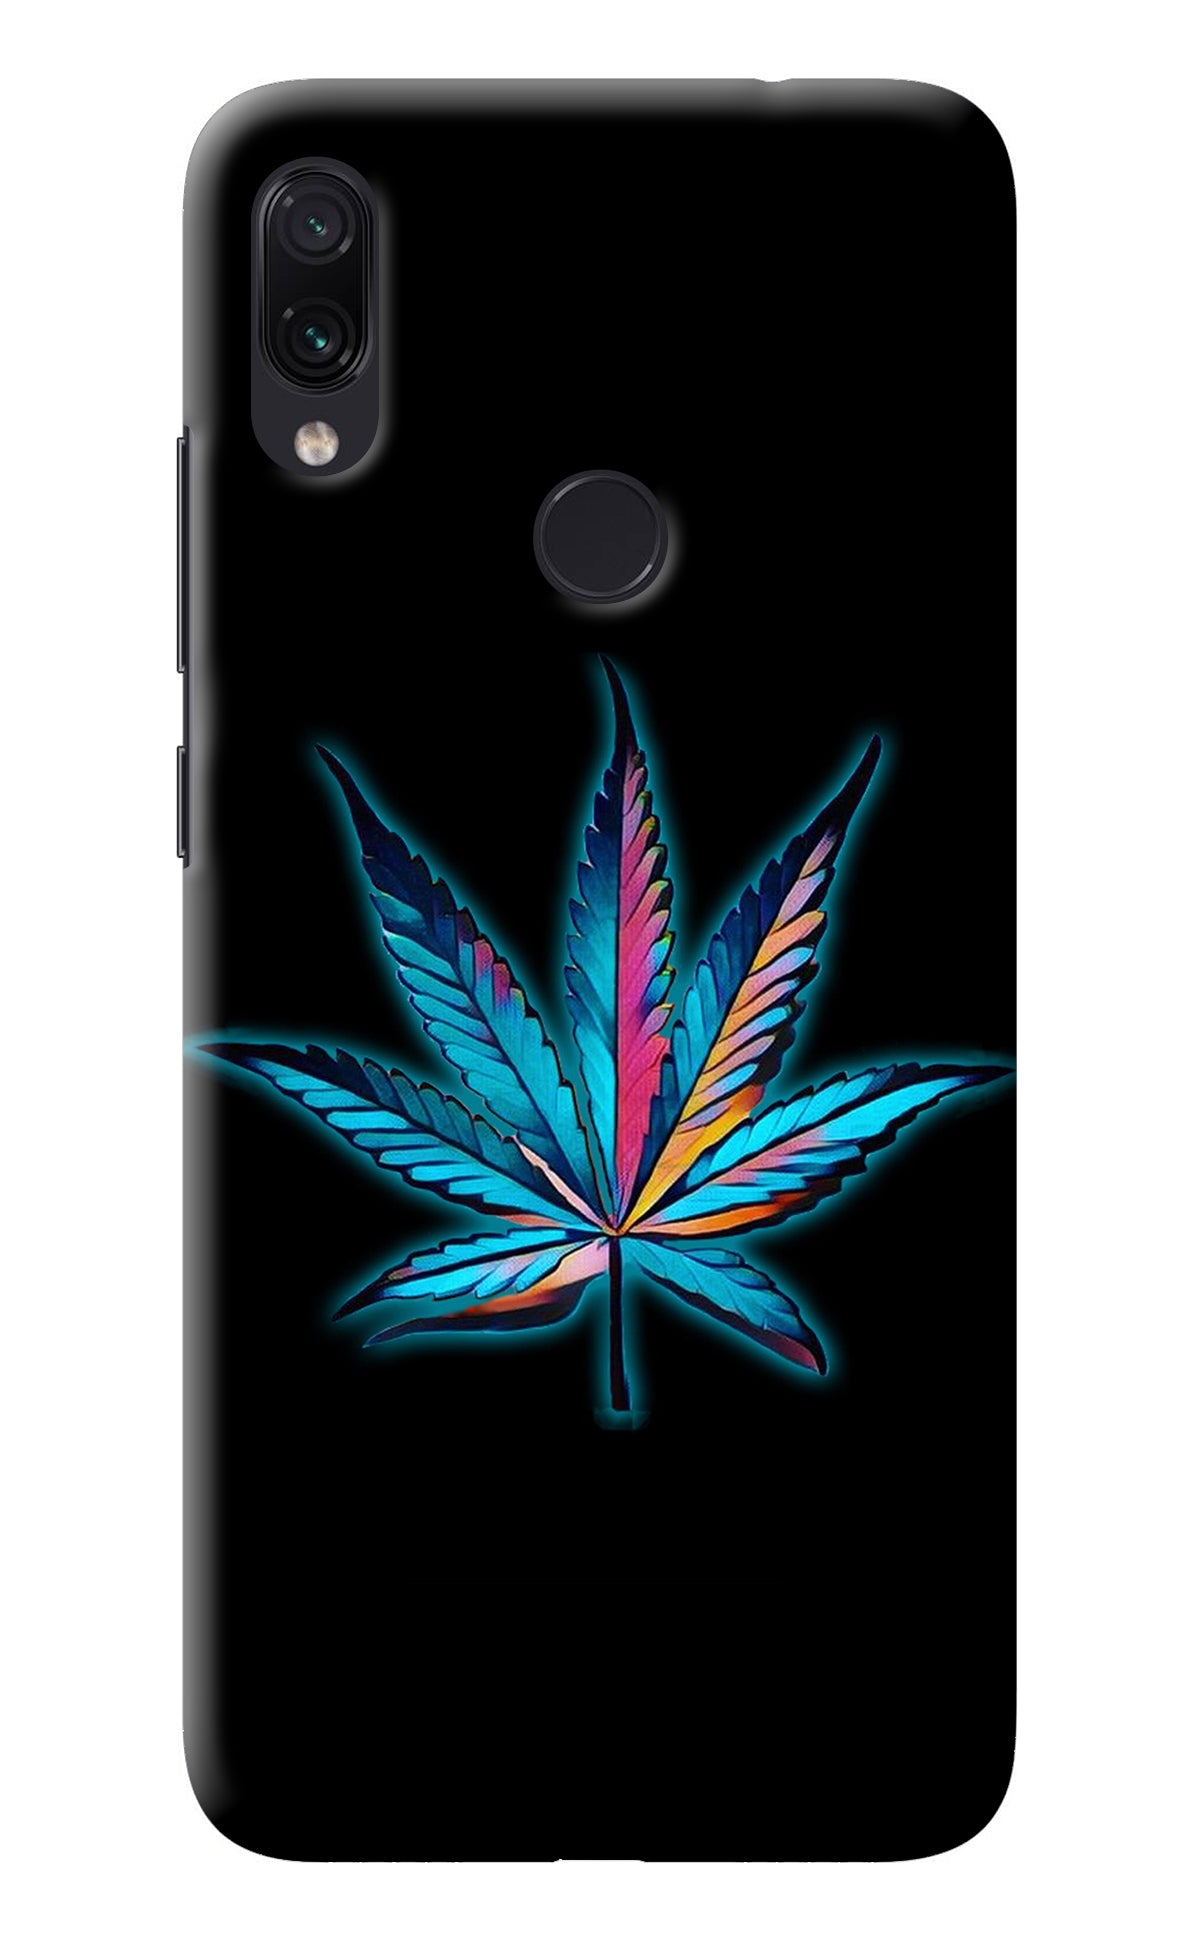 Weed Redmi Note 7 Pro Back Cover